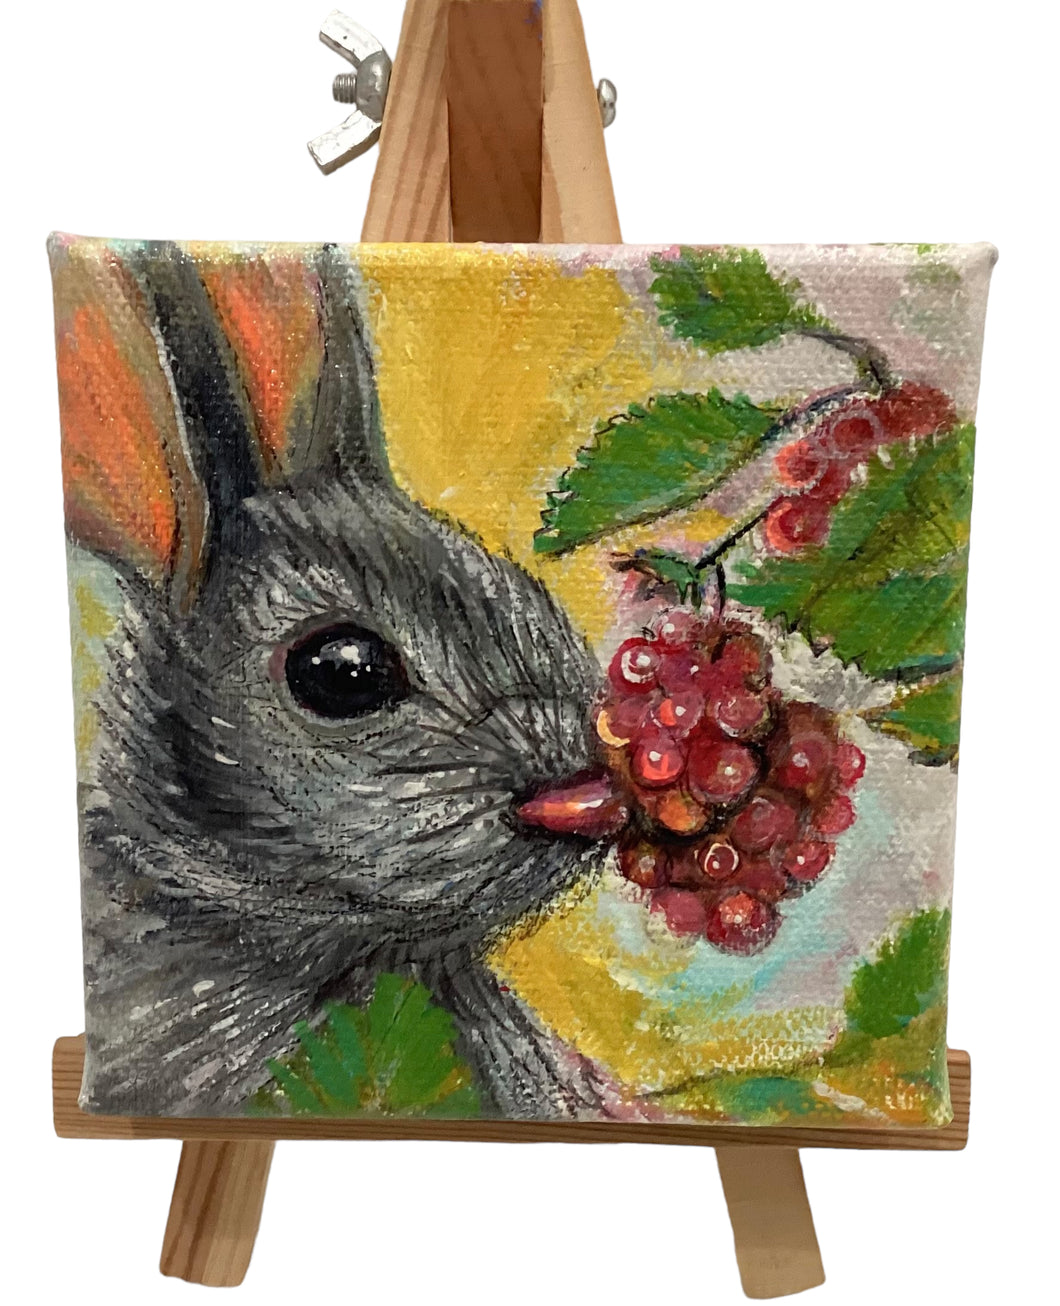 Bunny with Berries